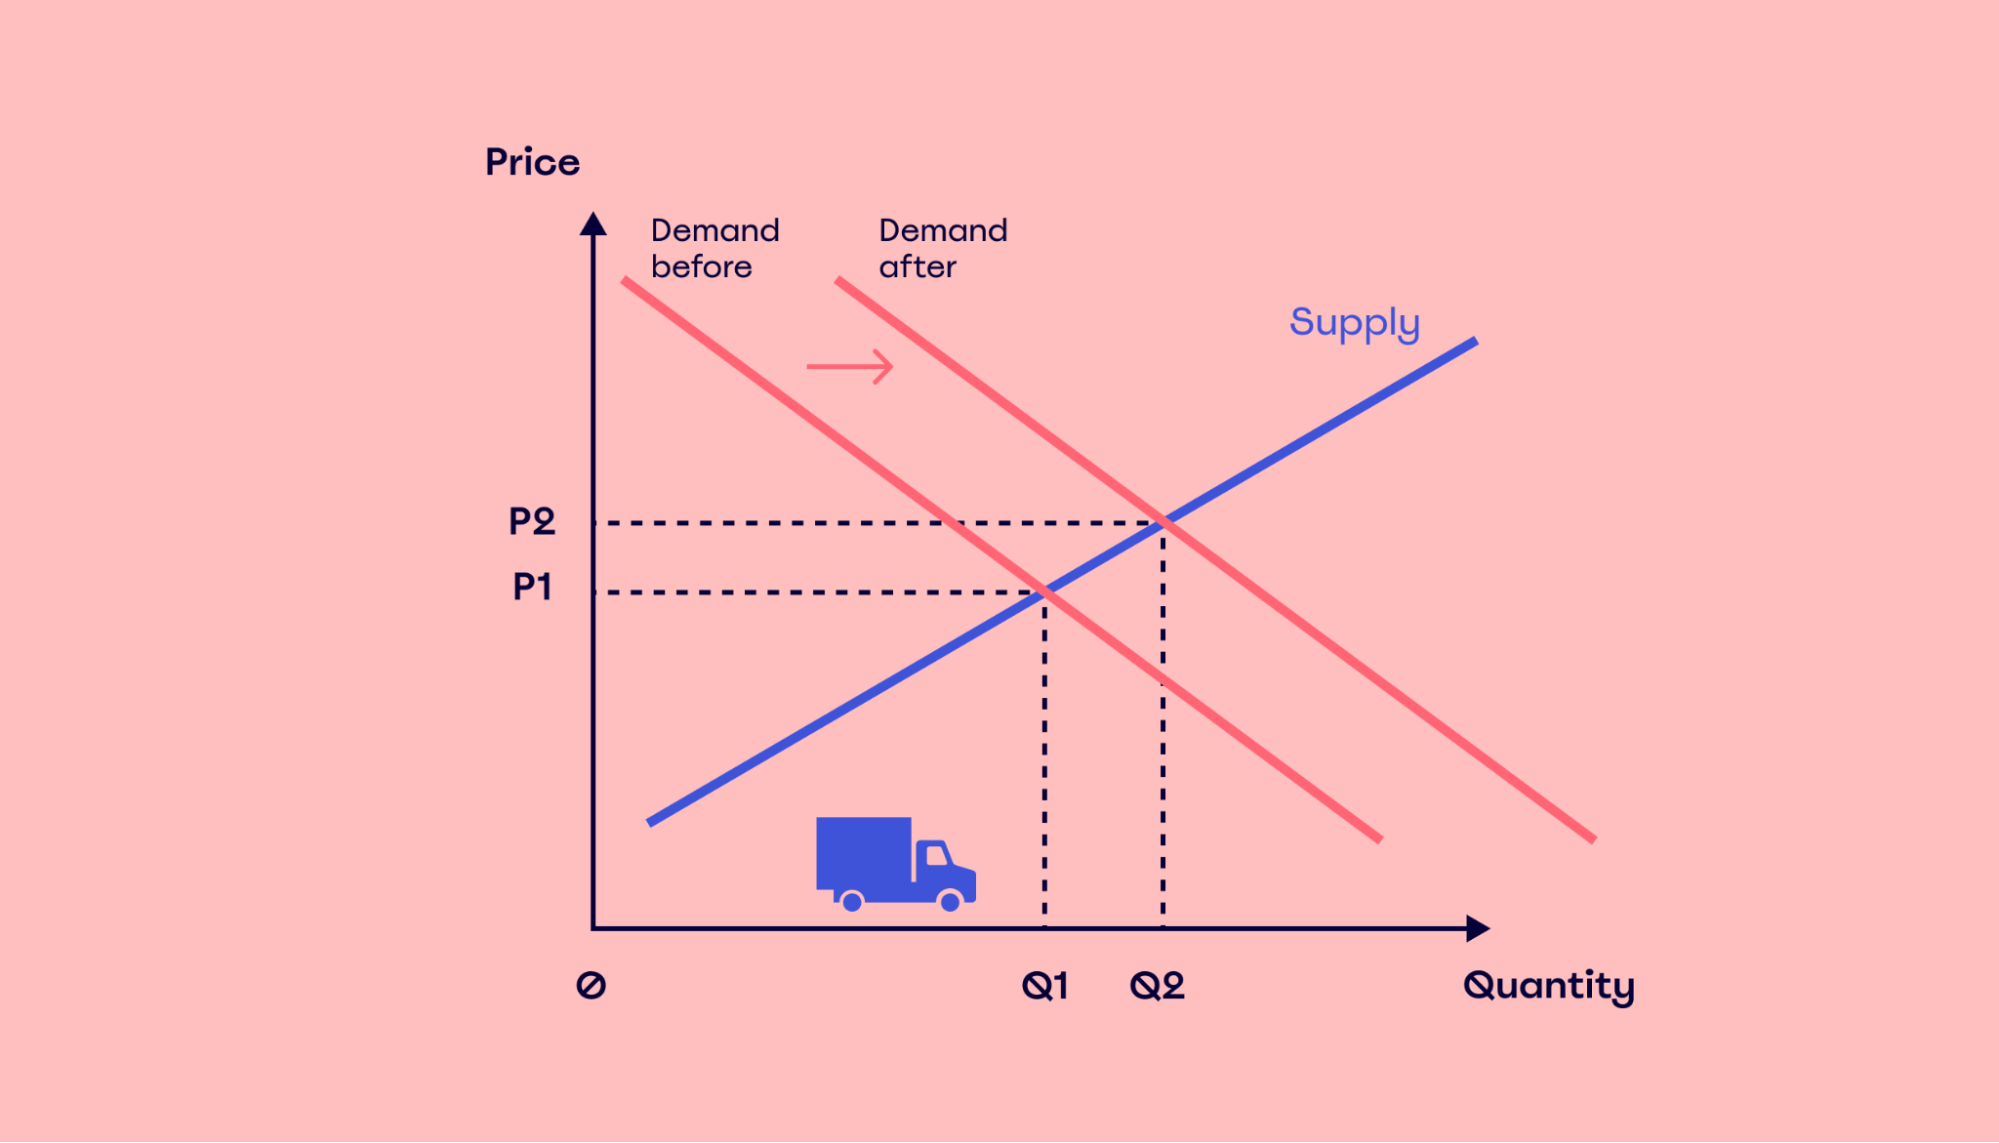 all supply and demand quantities in an assignment model are transshipment units